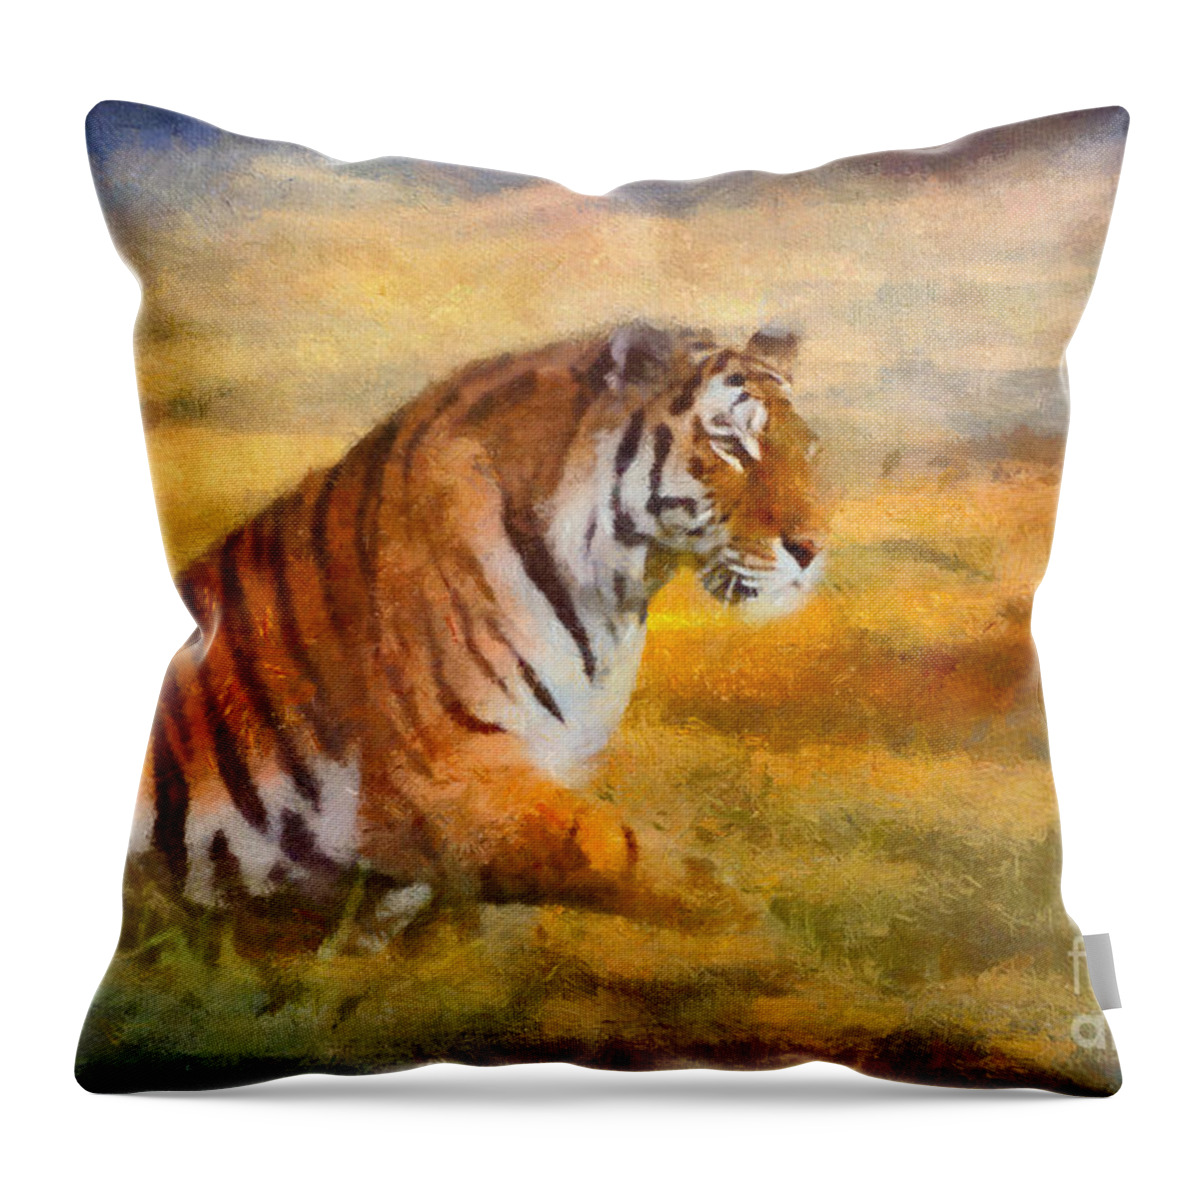 Tiger Throw Pillow featuring the digital art Tiger Dreams by Aimelle Ml